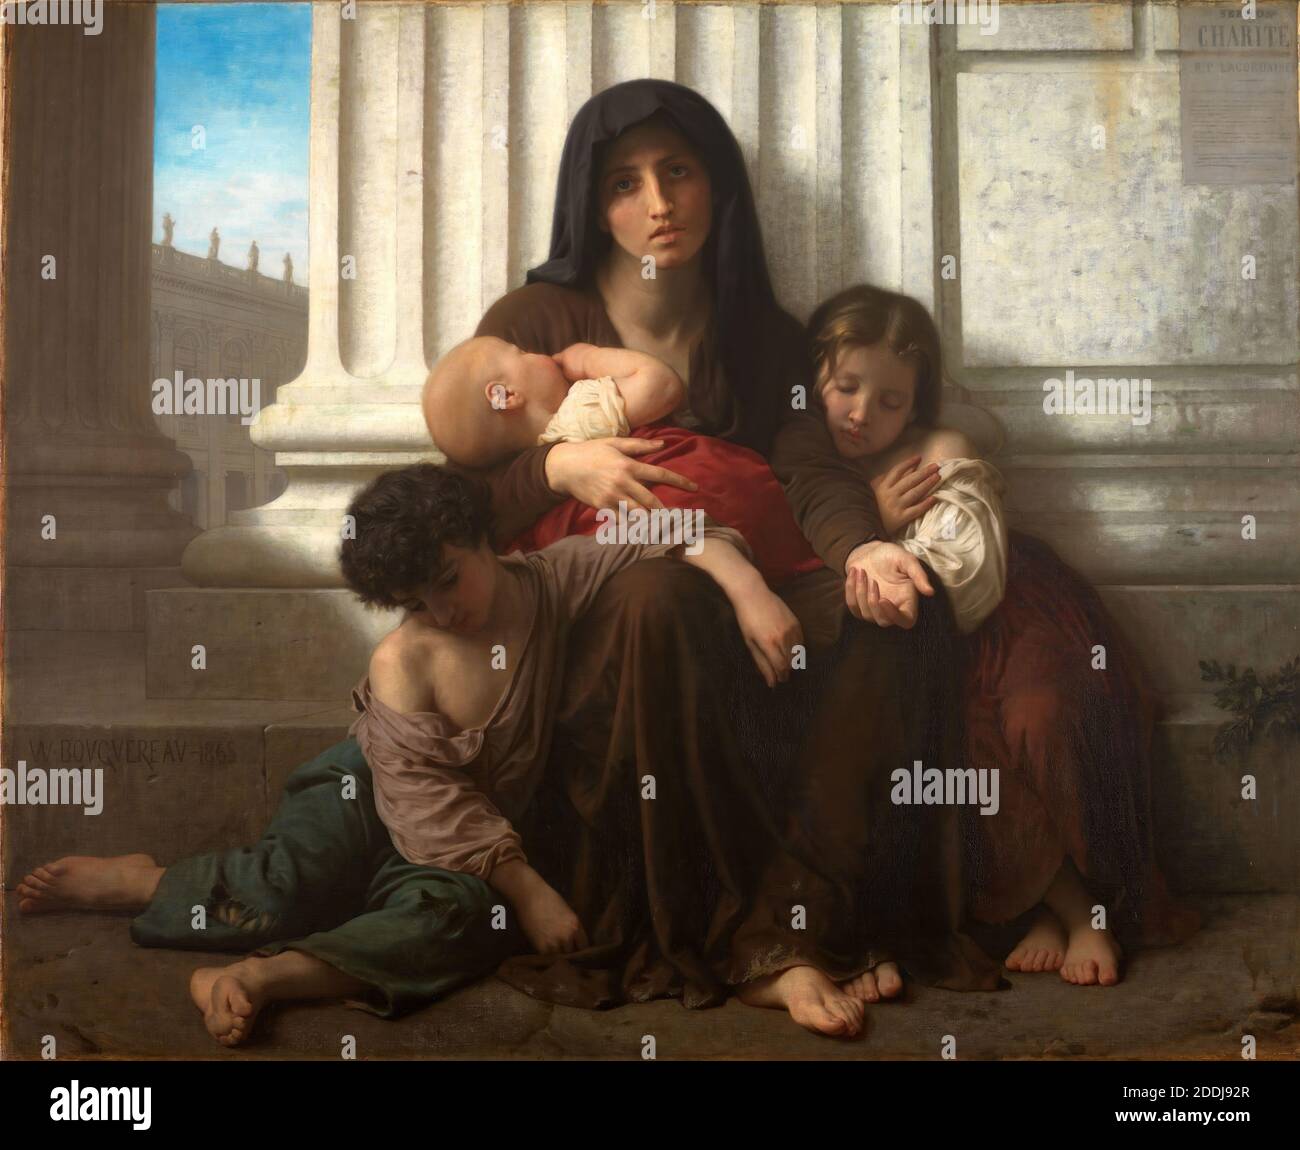 Charity, 1865, also known as 'The Indigent Family, Artist William Adolphe Bouguereau, Baby, Child, Mother, Barefoot, Poor Stock Photo